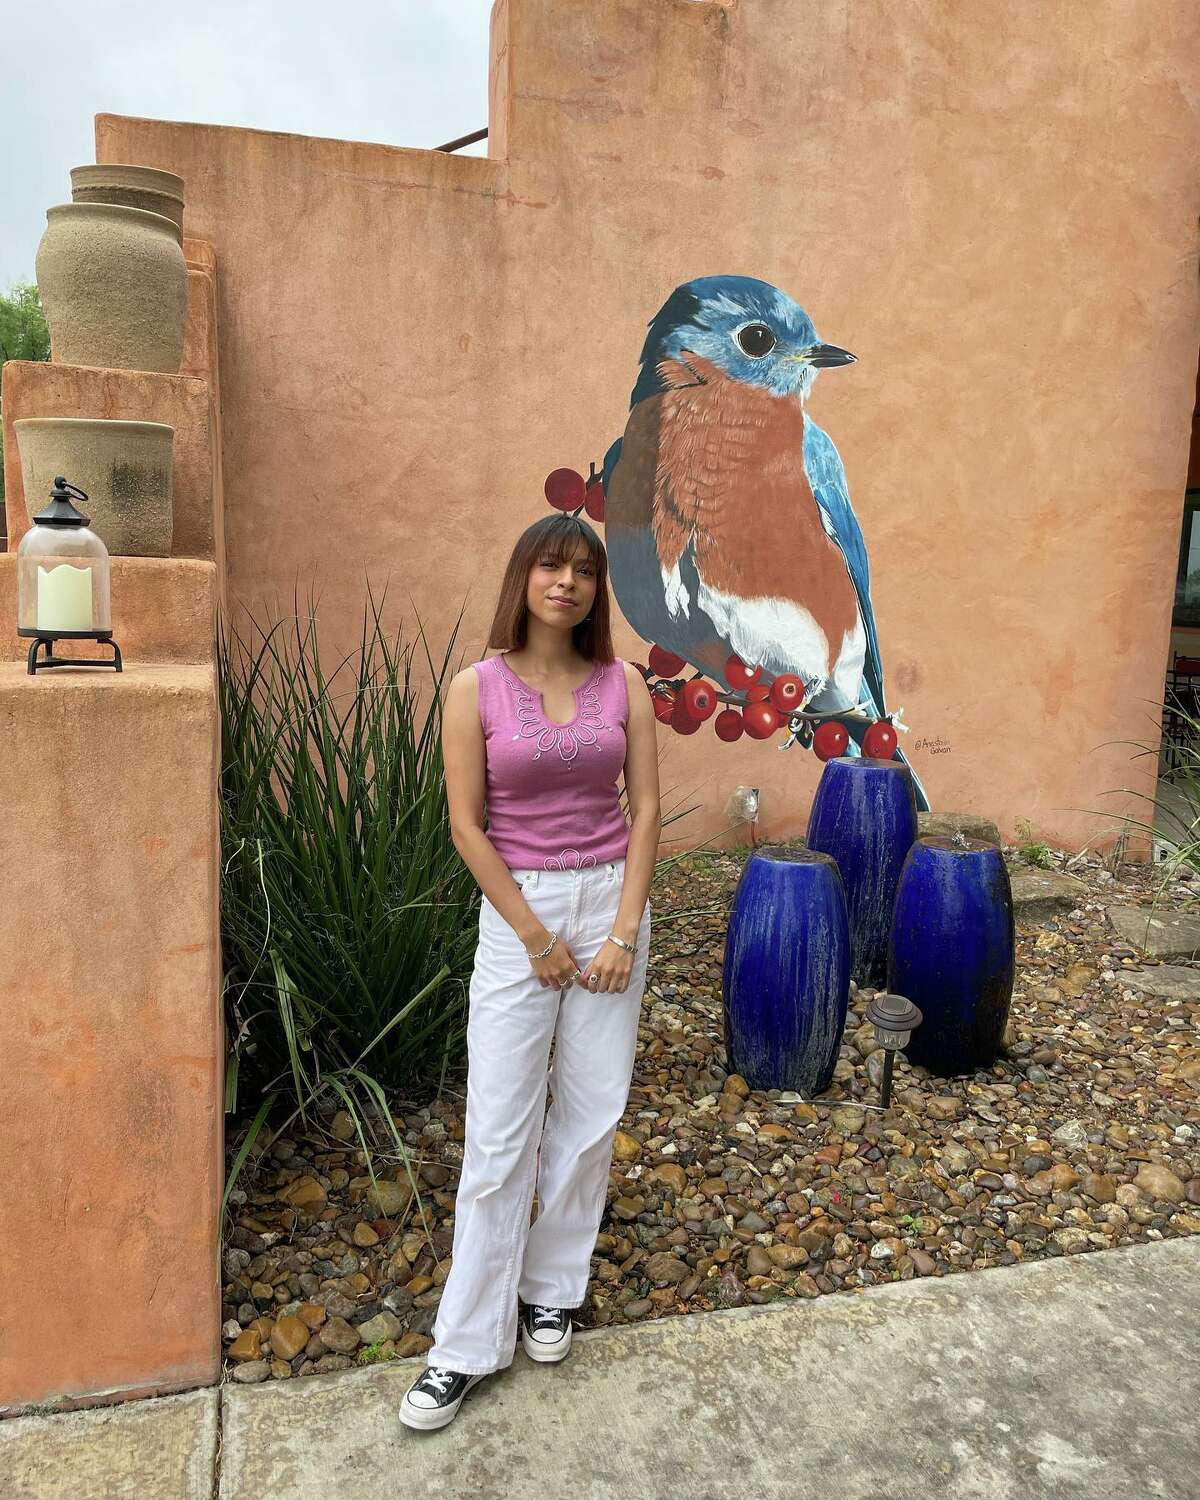 Laredo artist Anastasia Galvan is pictured with the city's newest public mural located at the Max A Mandel golf course. The mural features the male Eastern Bluebird and is based on her winning entry in the "Birds of the Brush" art contest.